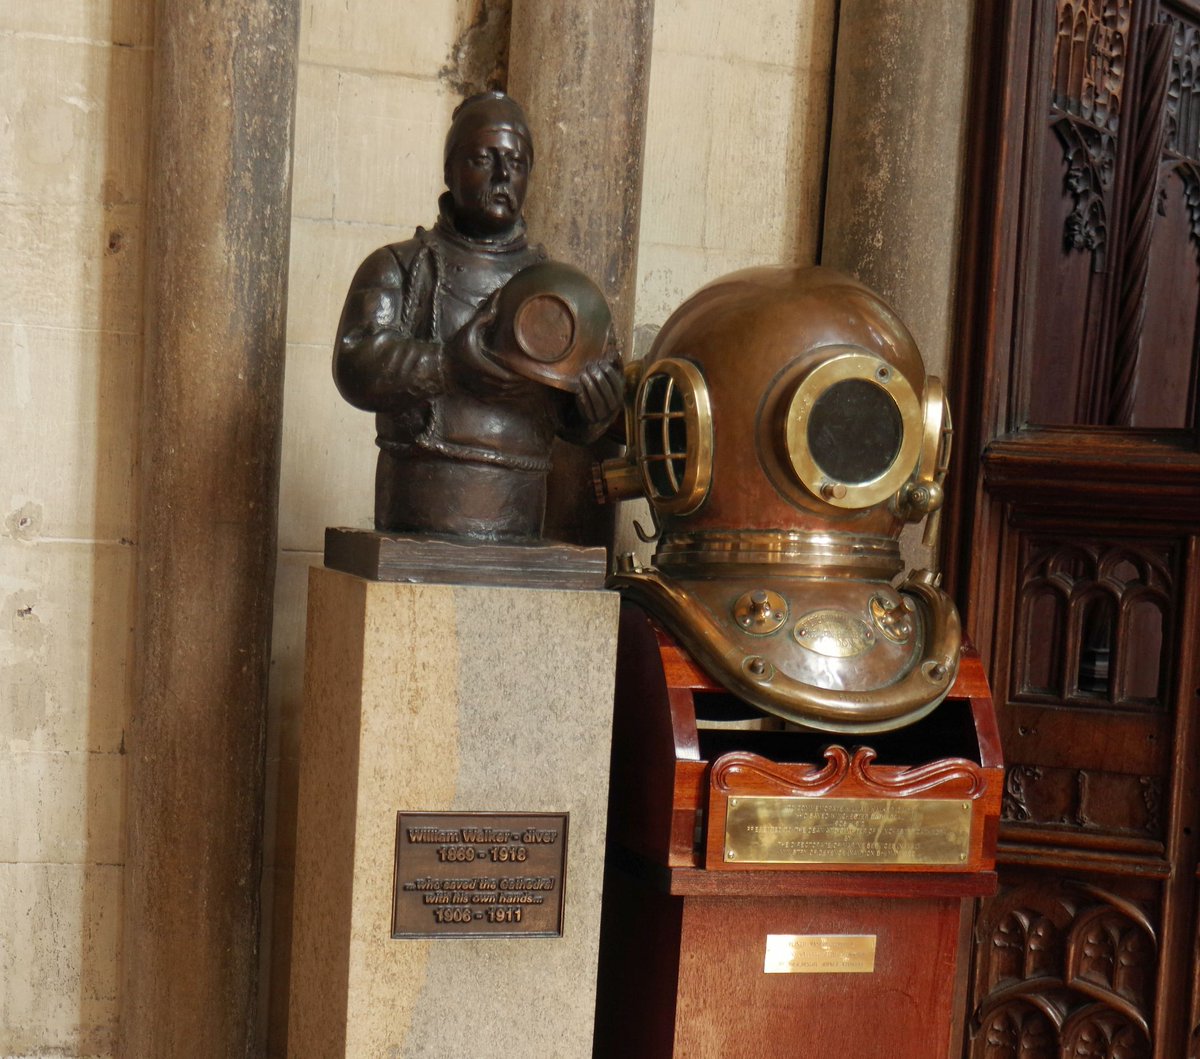 3/n Sculpture to William Walker inside the cathedral, 1869~1918, a diver who "saved the [Winchester] Cathedral with his own hands", working underwater & often in the dark on the foundations shoring up the cathedral, then under threat from continual flooding & erosion. My photo